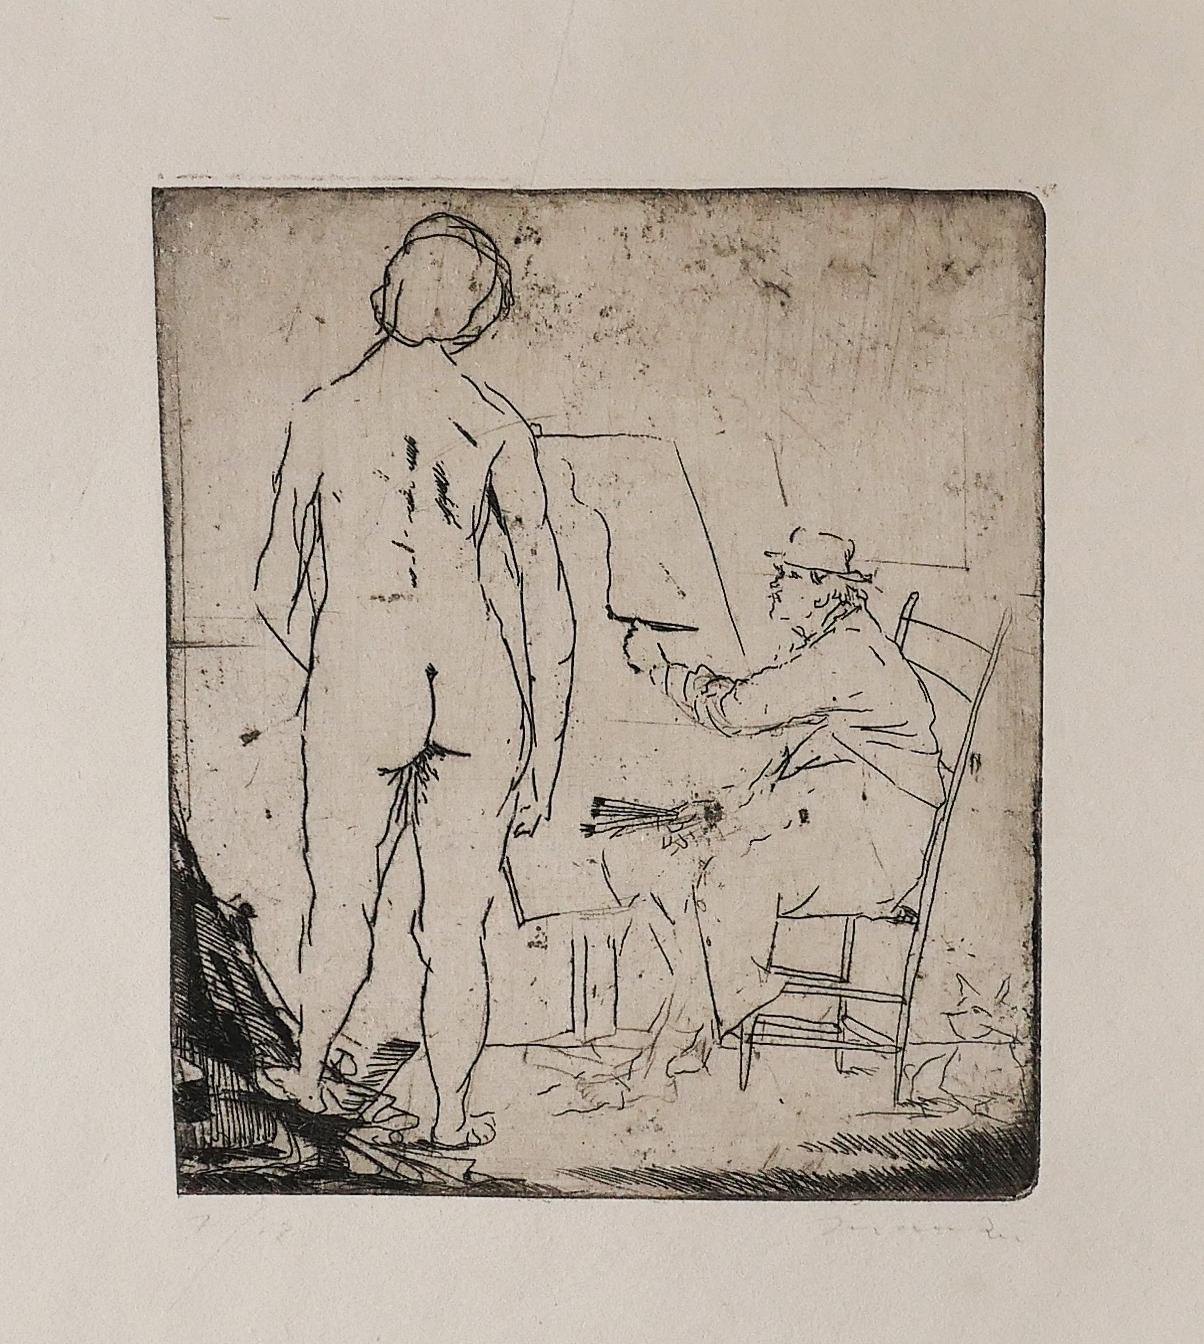 The Painter and the Model  - Etching by Giacomo Manzù - 1930s